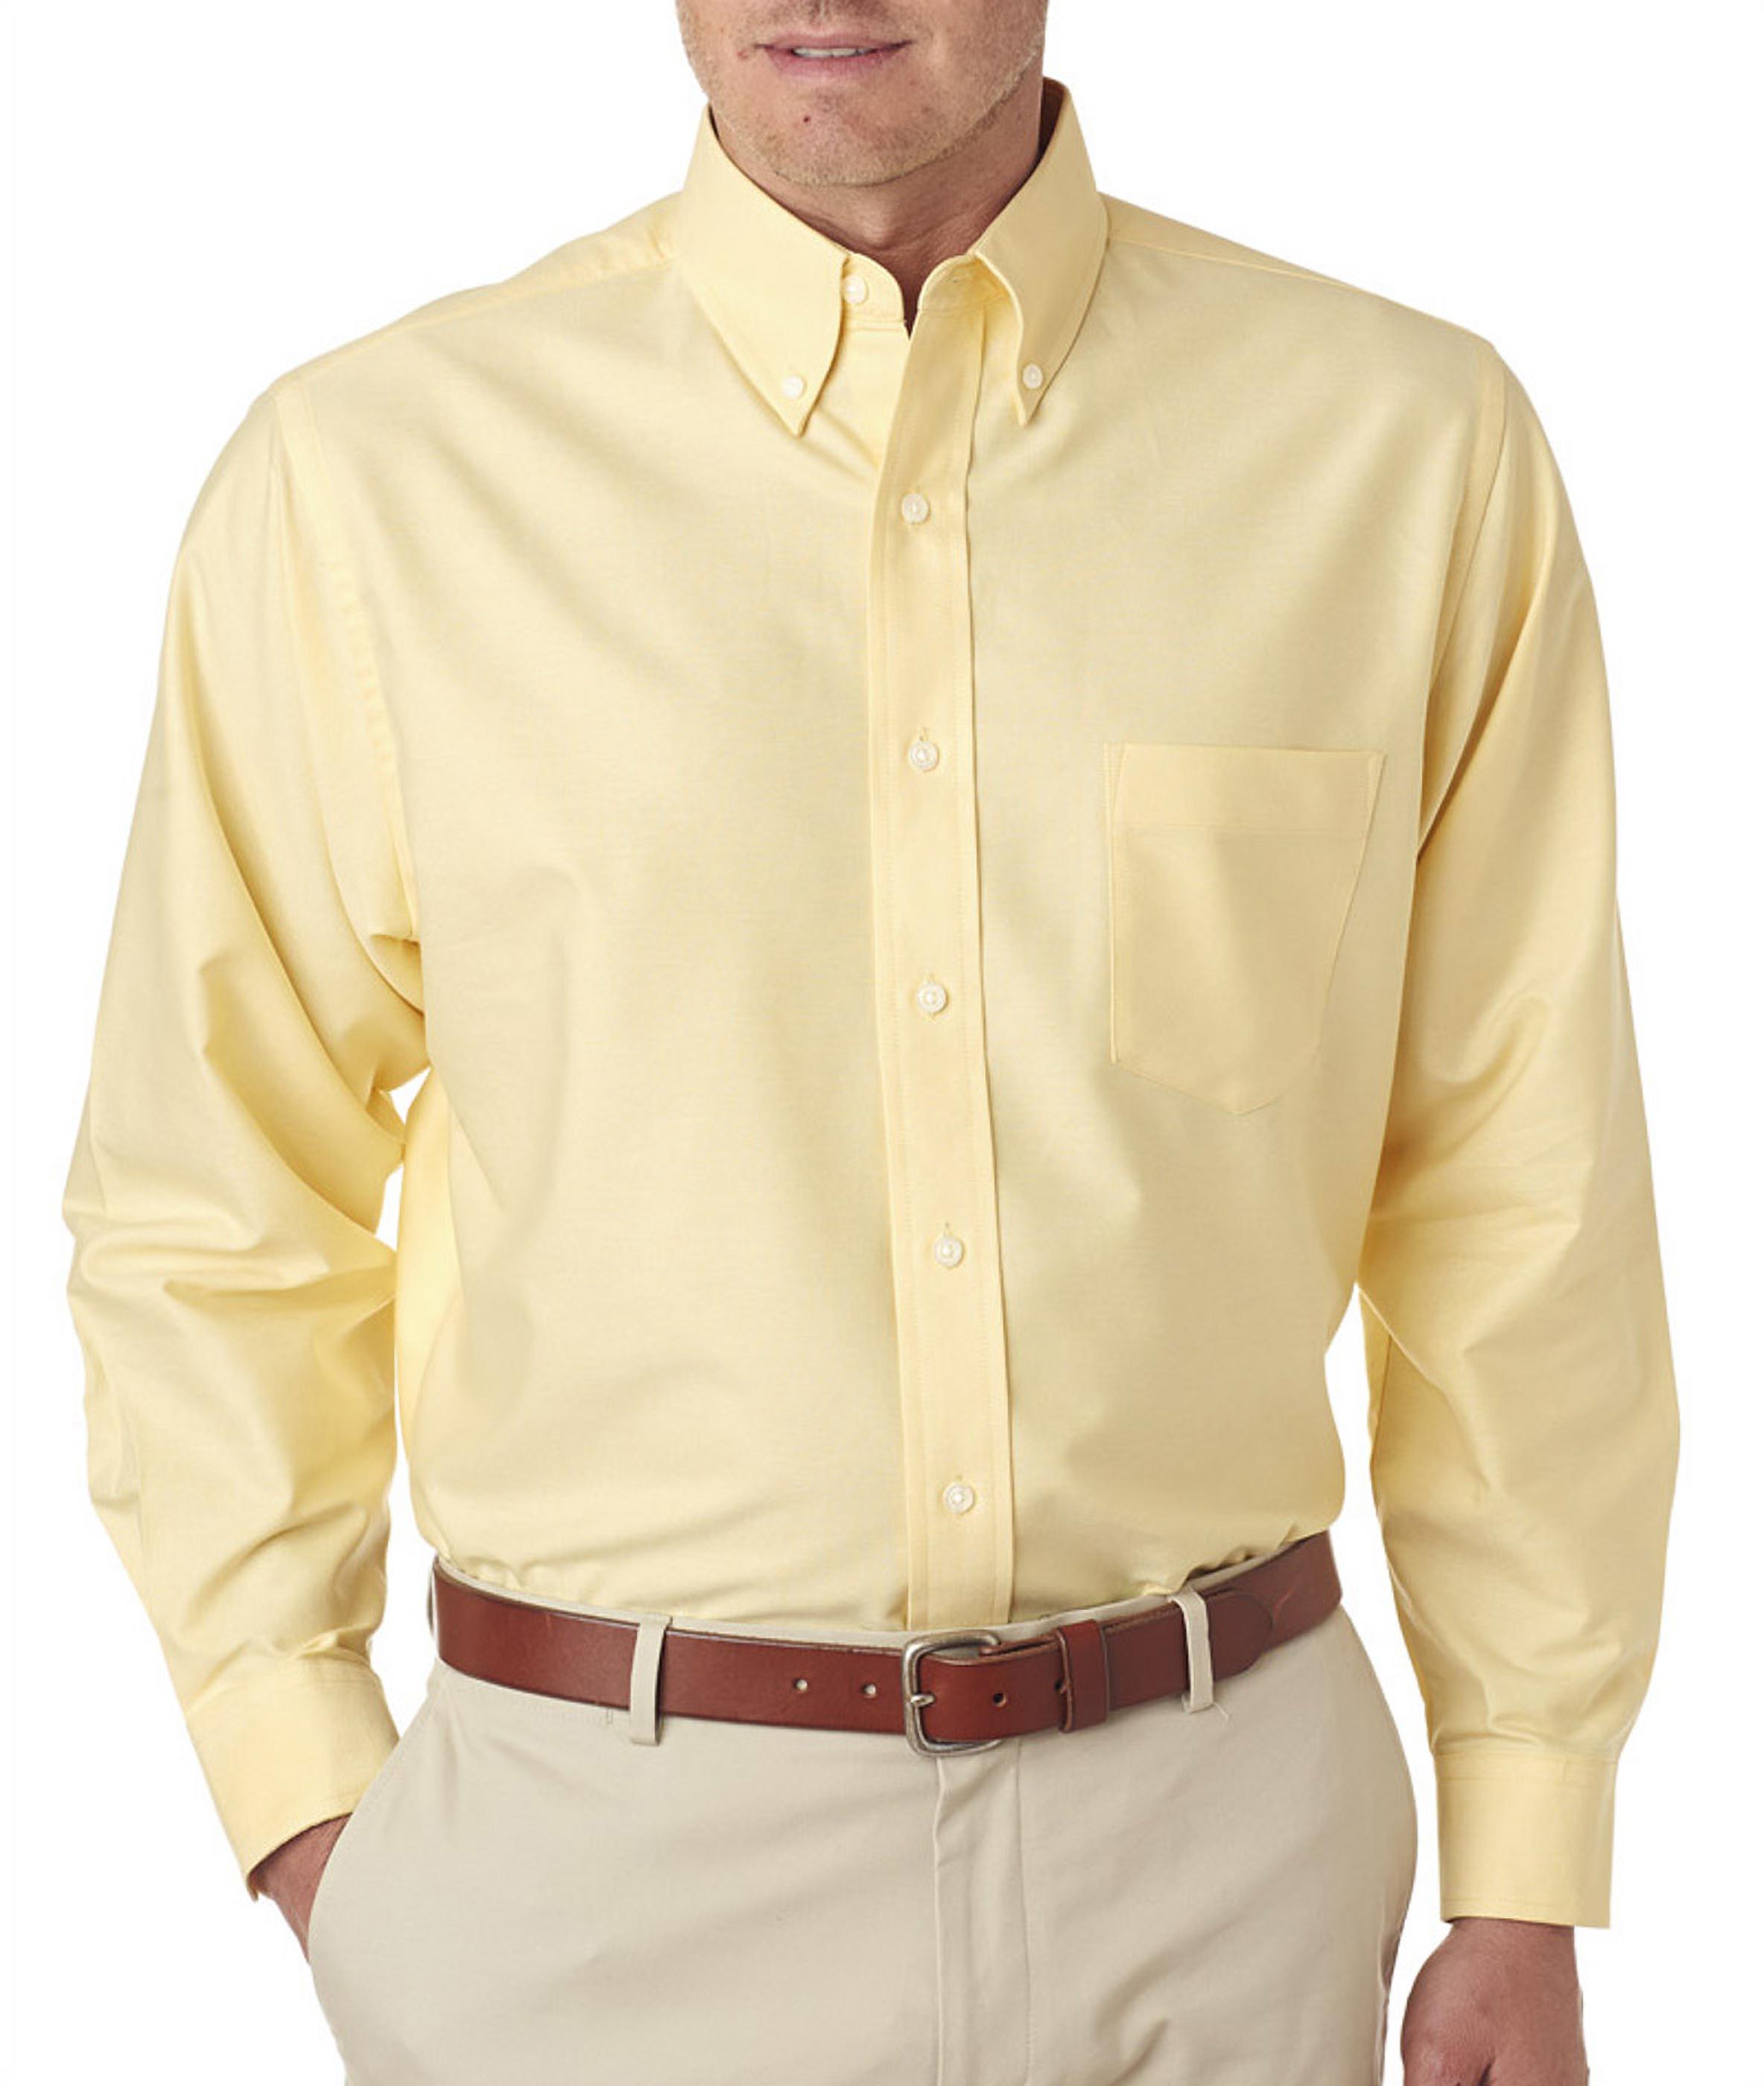 UltraClub Men's Classic Wrinkle-Resistant Long-Sleeve Oxford - image 1 of 3